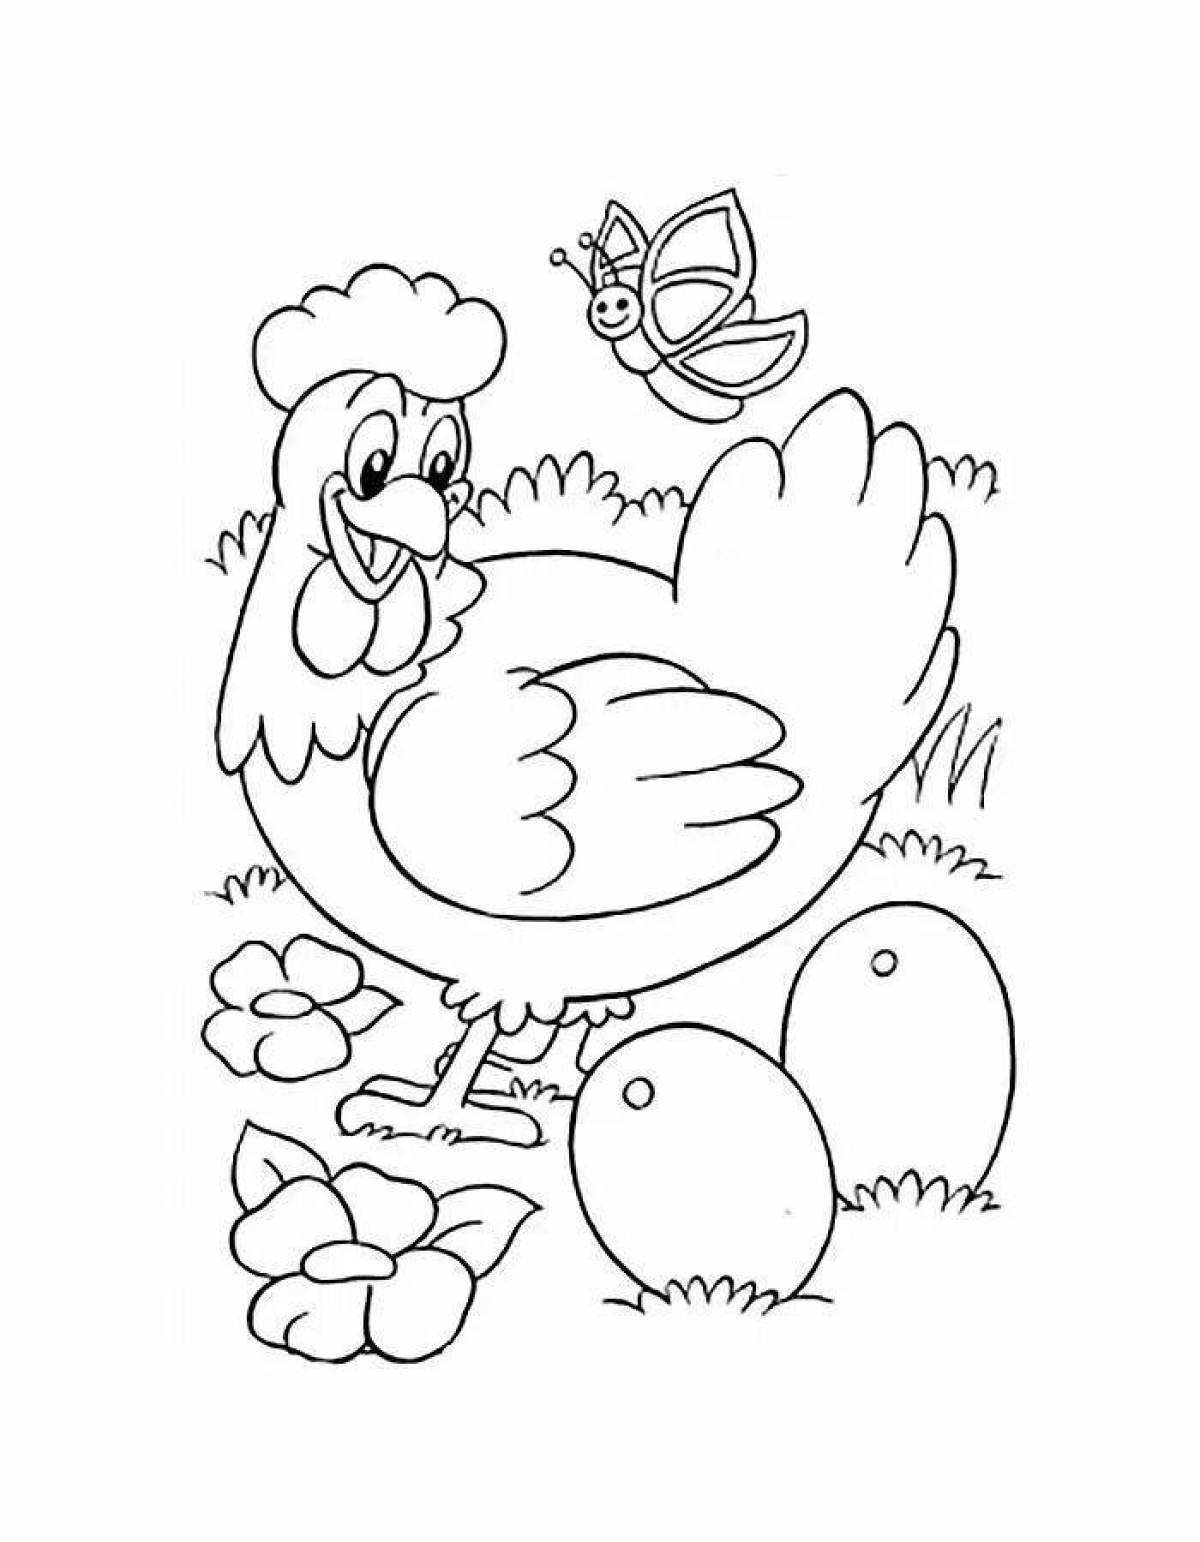 Royal chicken coloring page